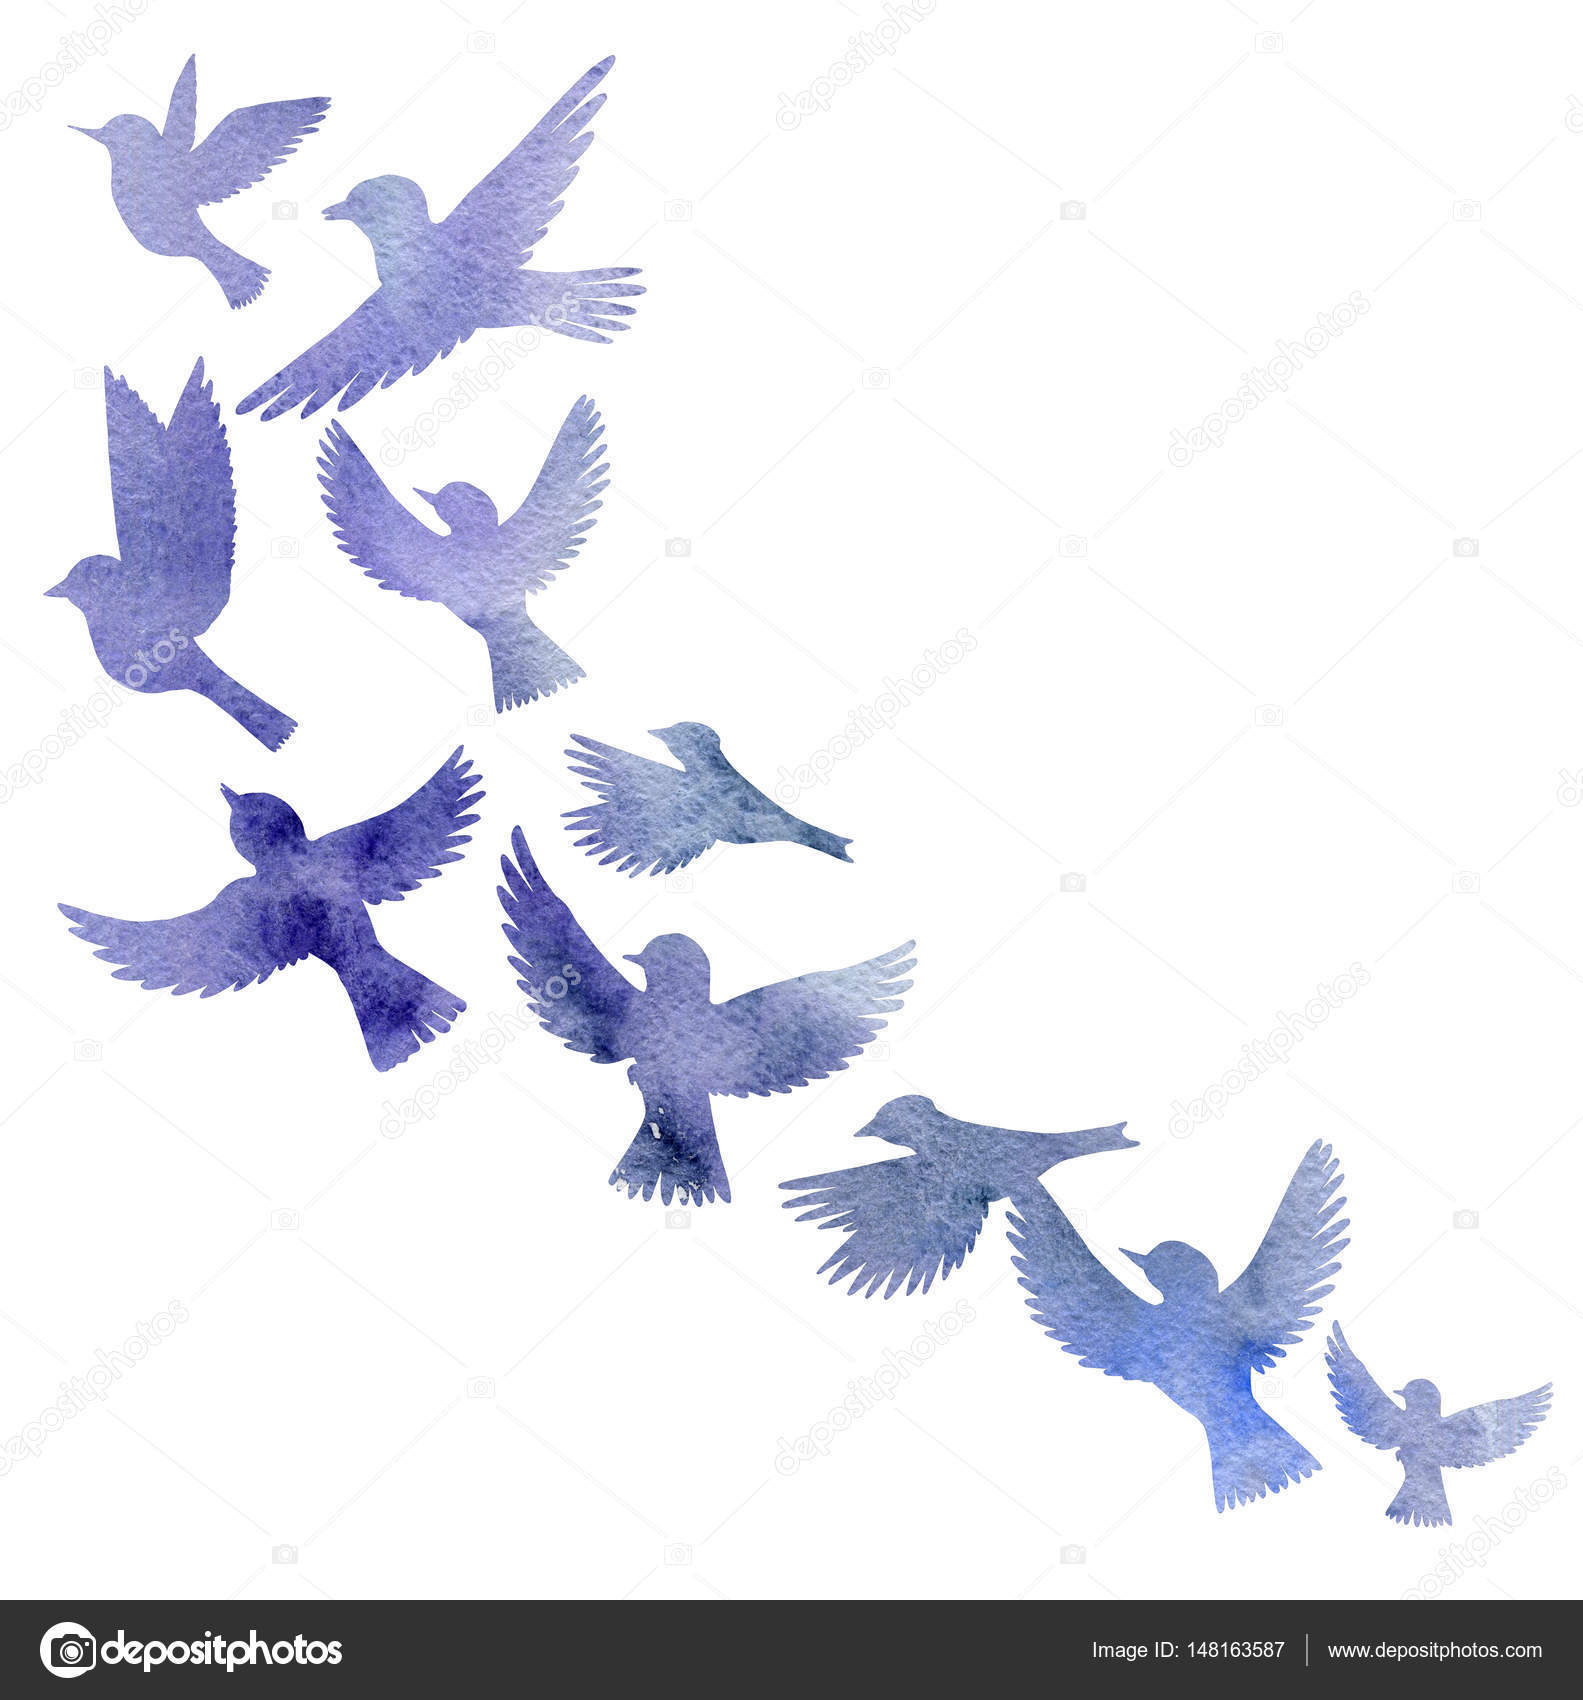 watercolor flying birds silhouettes — Stock Photo © cat_arch_angel ...